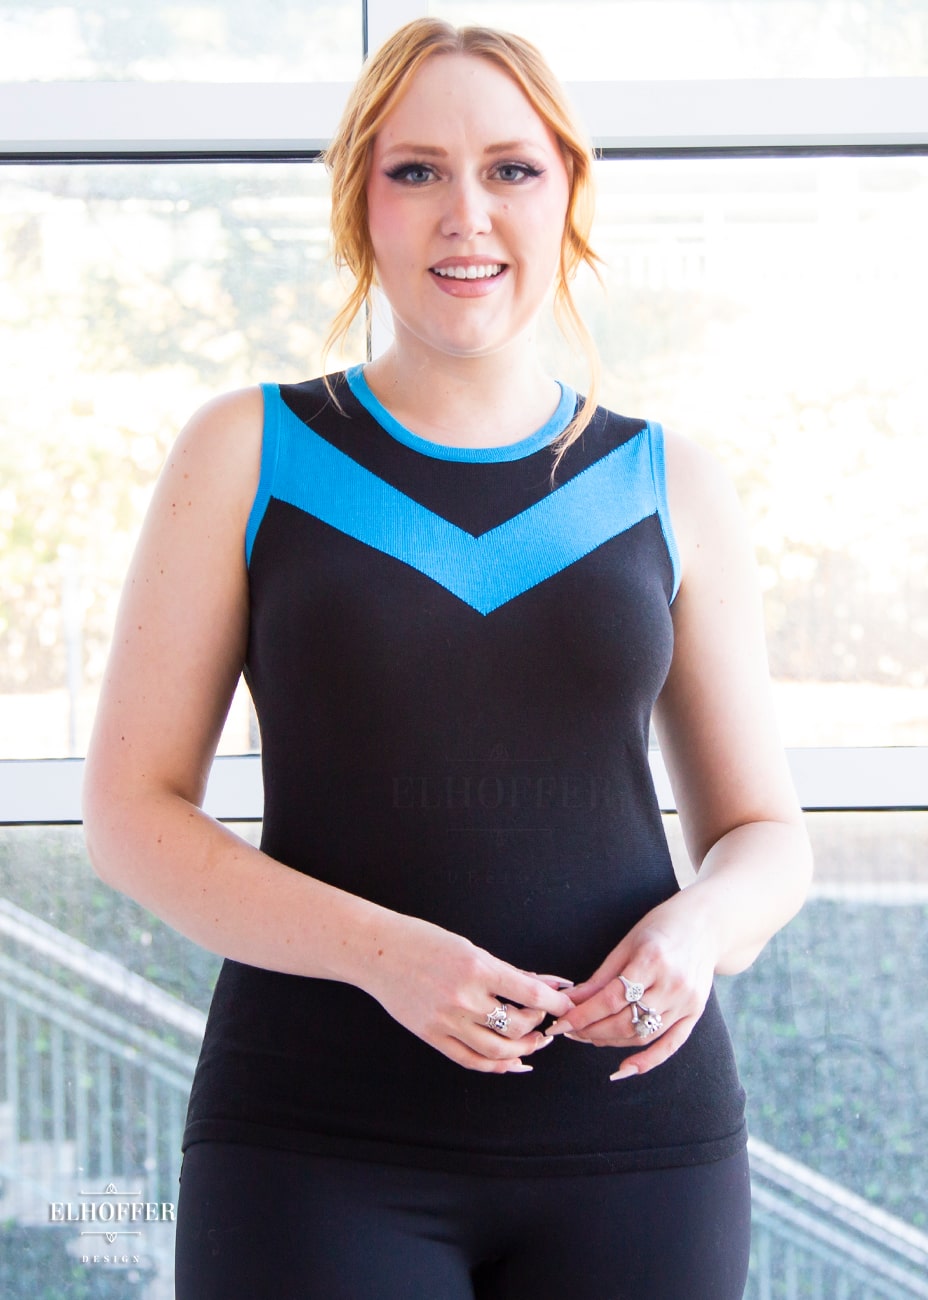 Kelsey, a fair skinned S model with strawberry blonde hair pulled back in a pony tail, is smiling while wearing a light weight sleeveless knit top. The body of the top is mainly black with a bright teal chevron design across the chest and matching teal binding around the neckline and armholes.